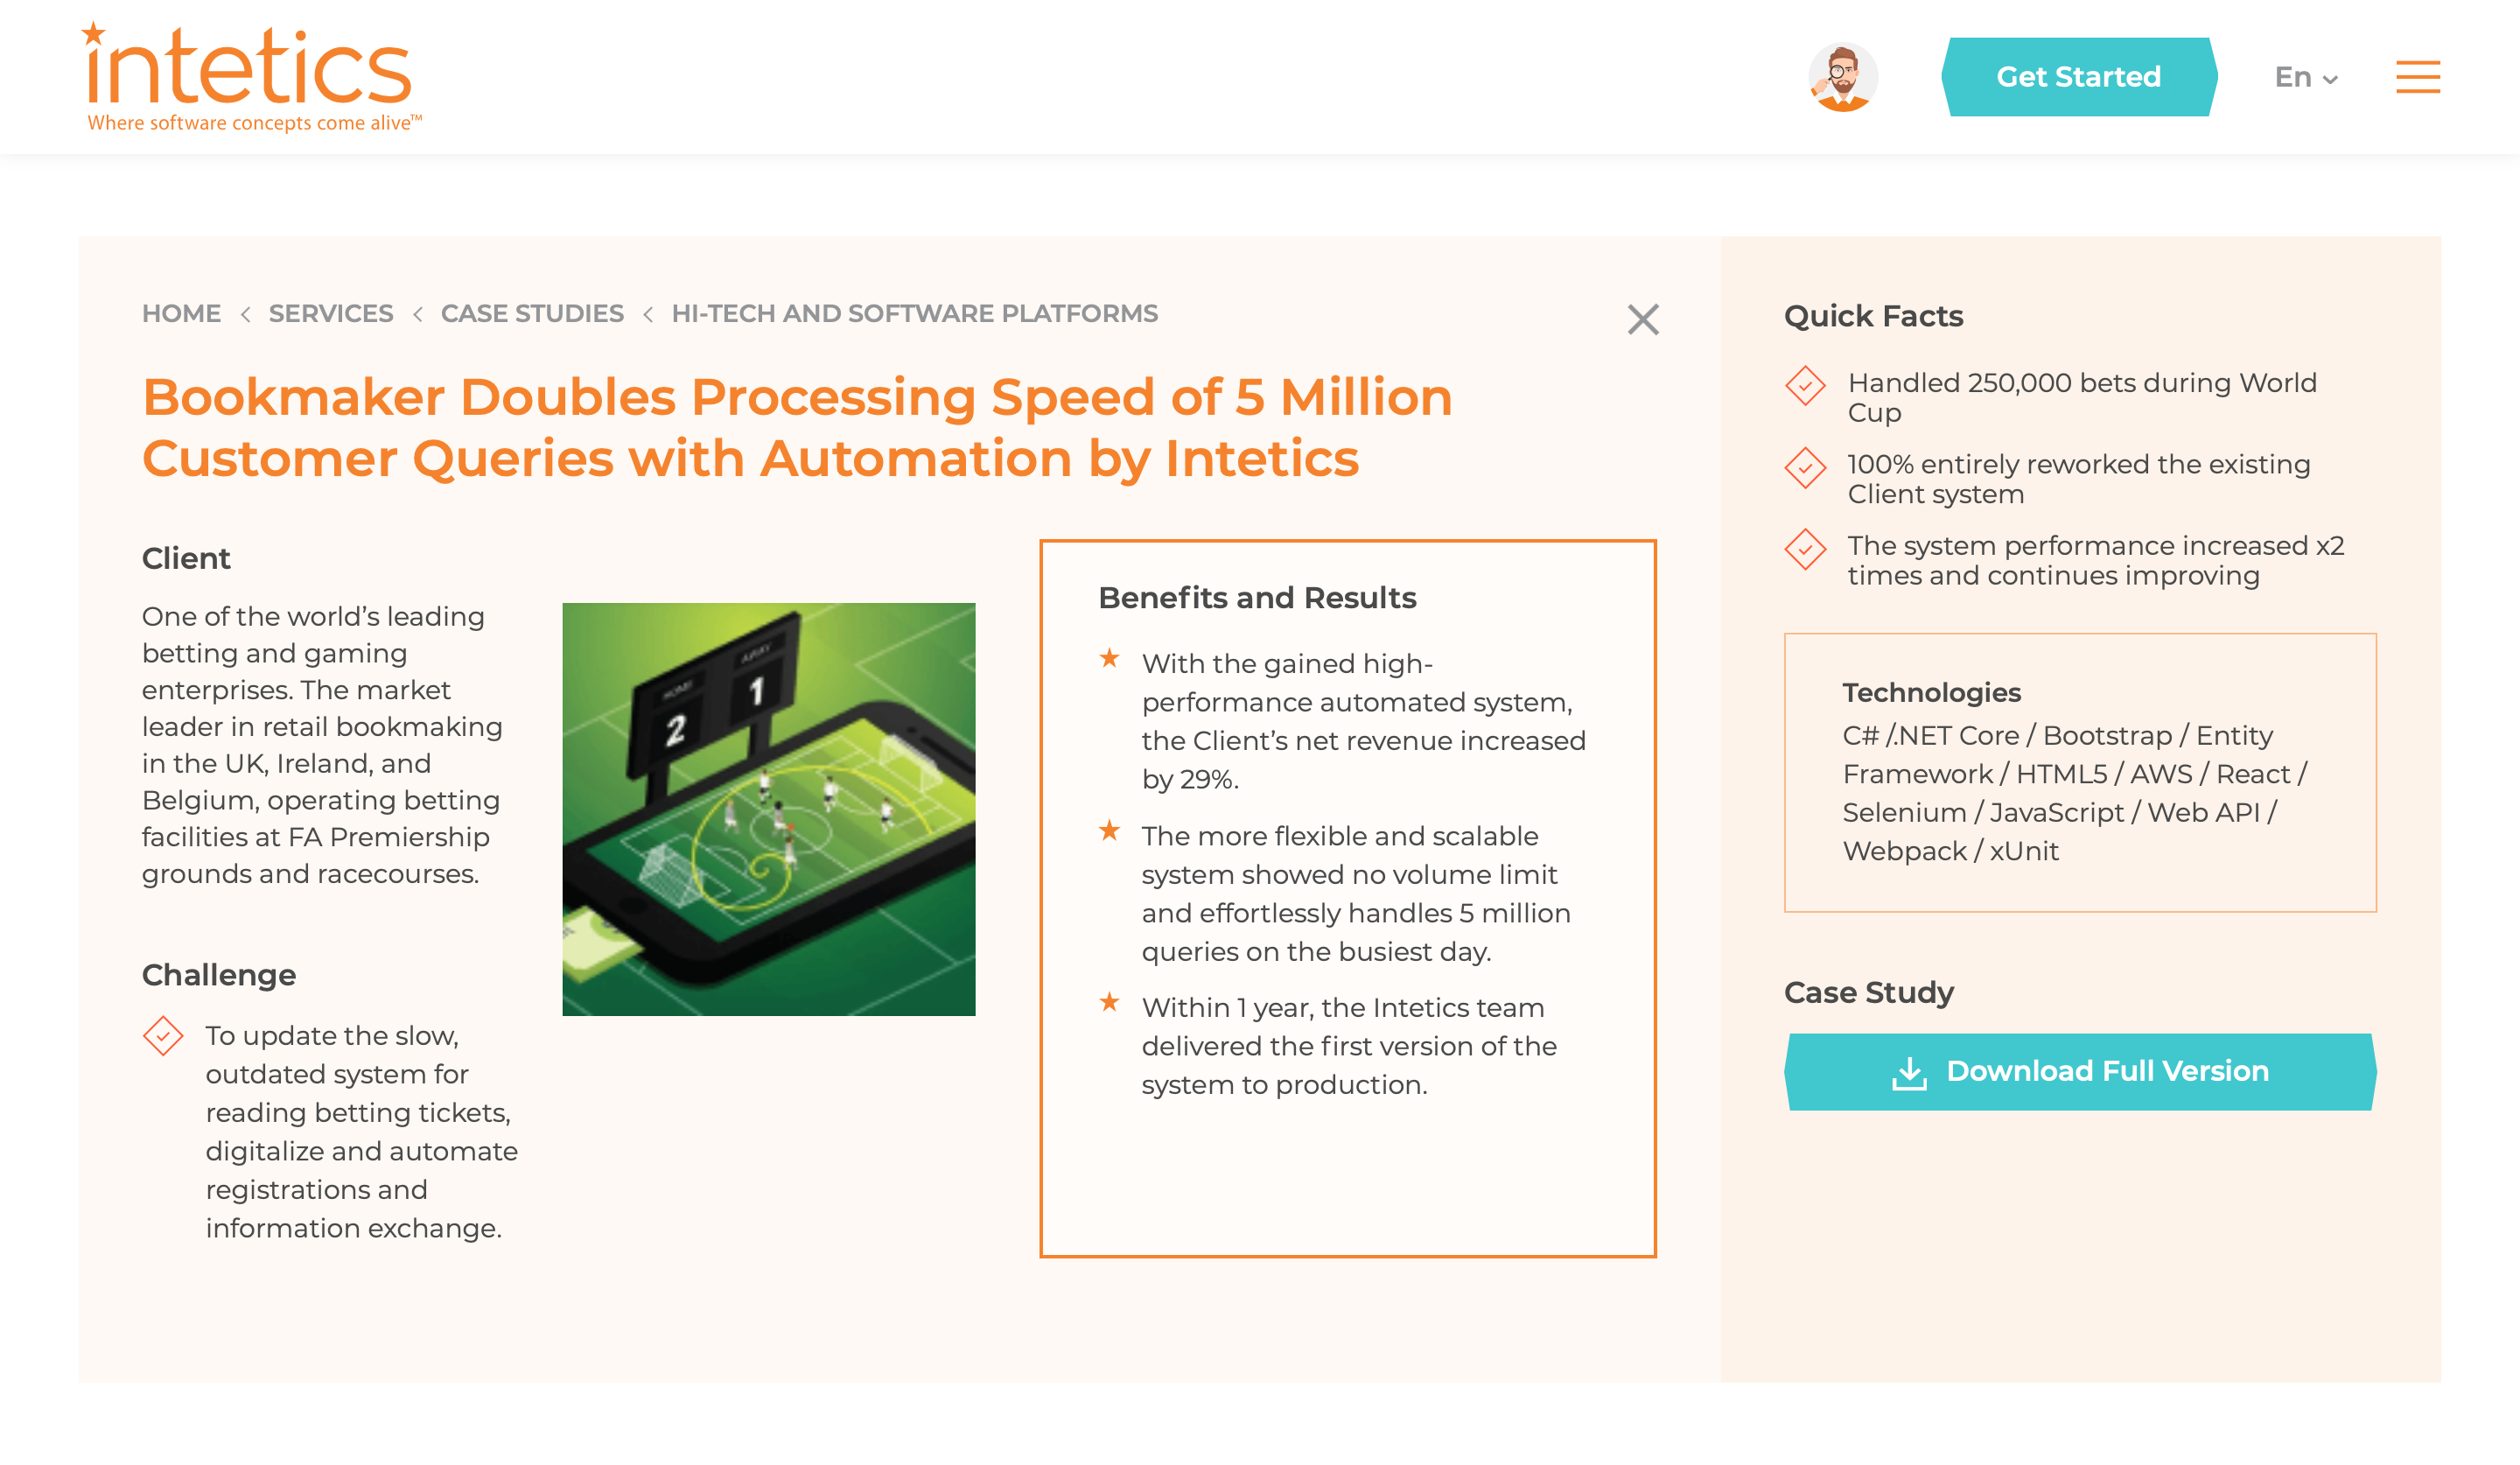 Bookmaker Doubles Processing Speed of 5 Million Customer Queries with Automation by Intetics